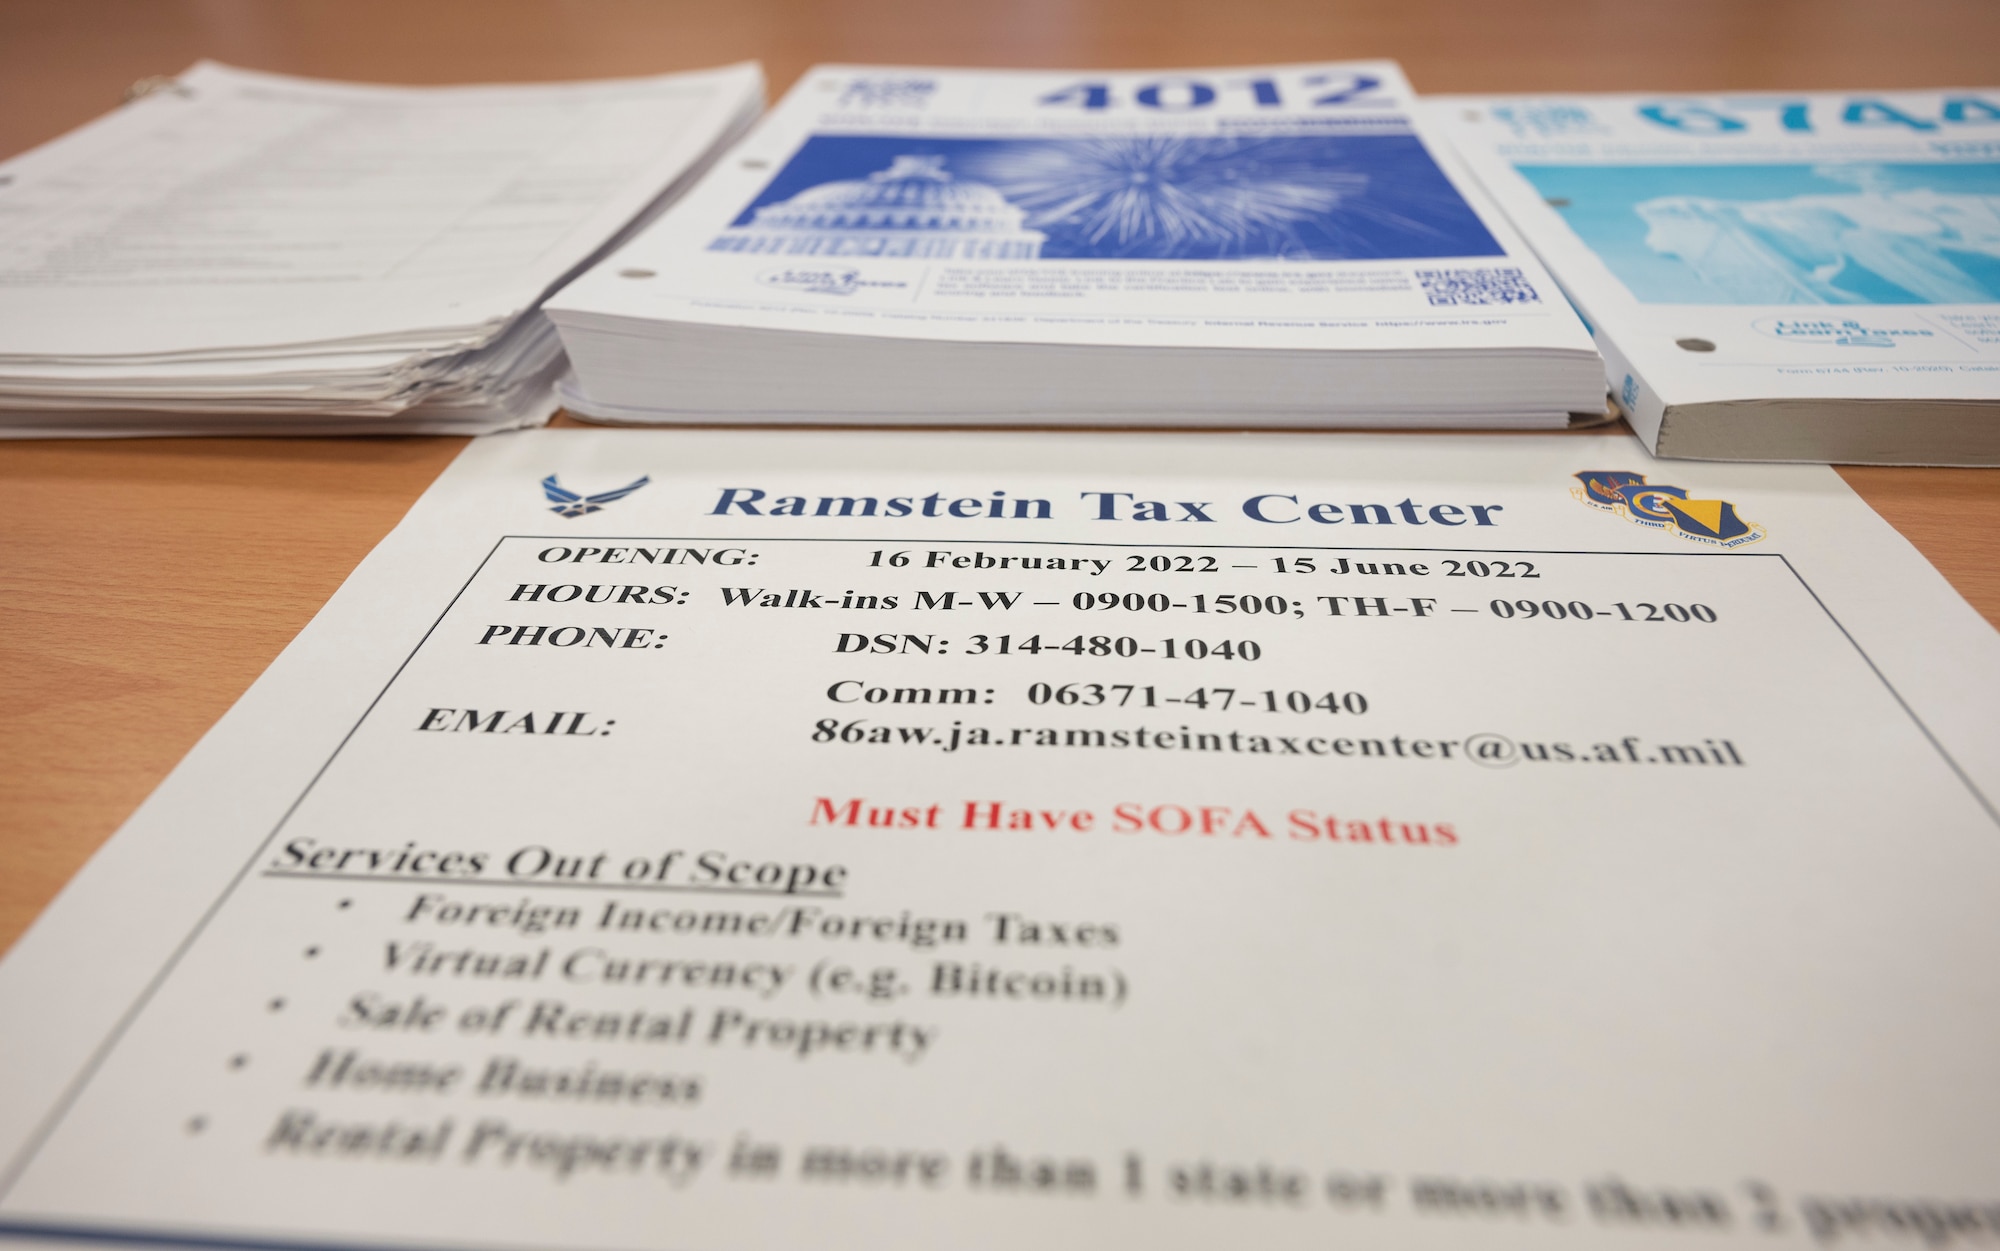 The Ramstein Tax Center officially opened Feb. 16, 2022 at Ramstein Air Base, Germany. The Tax Center located at the 86th Airlift Wing Legal office is offering a free tax service to members of the Kaiserslautern Military Community who fall under the Status of Forces Agreement. (U.S. Air Force photo by Senior Airman Thomas Karol)